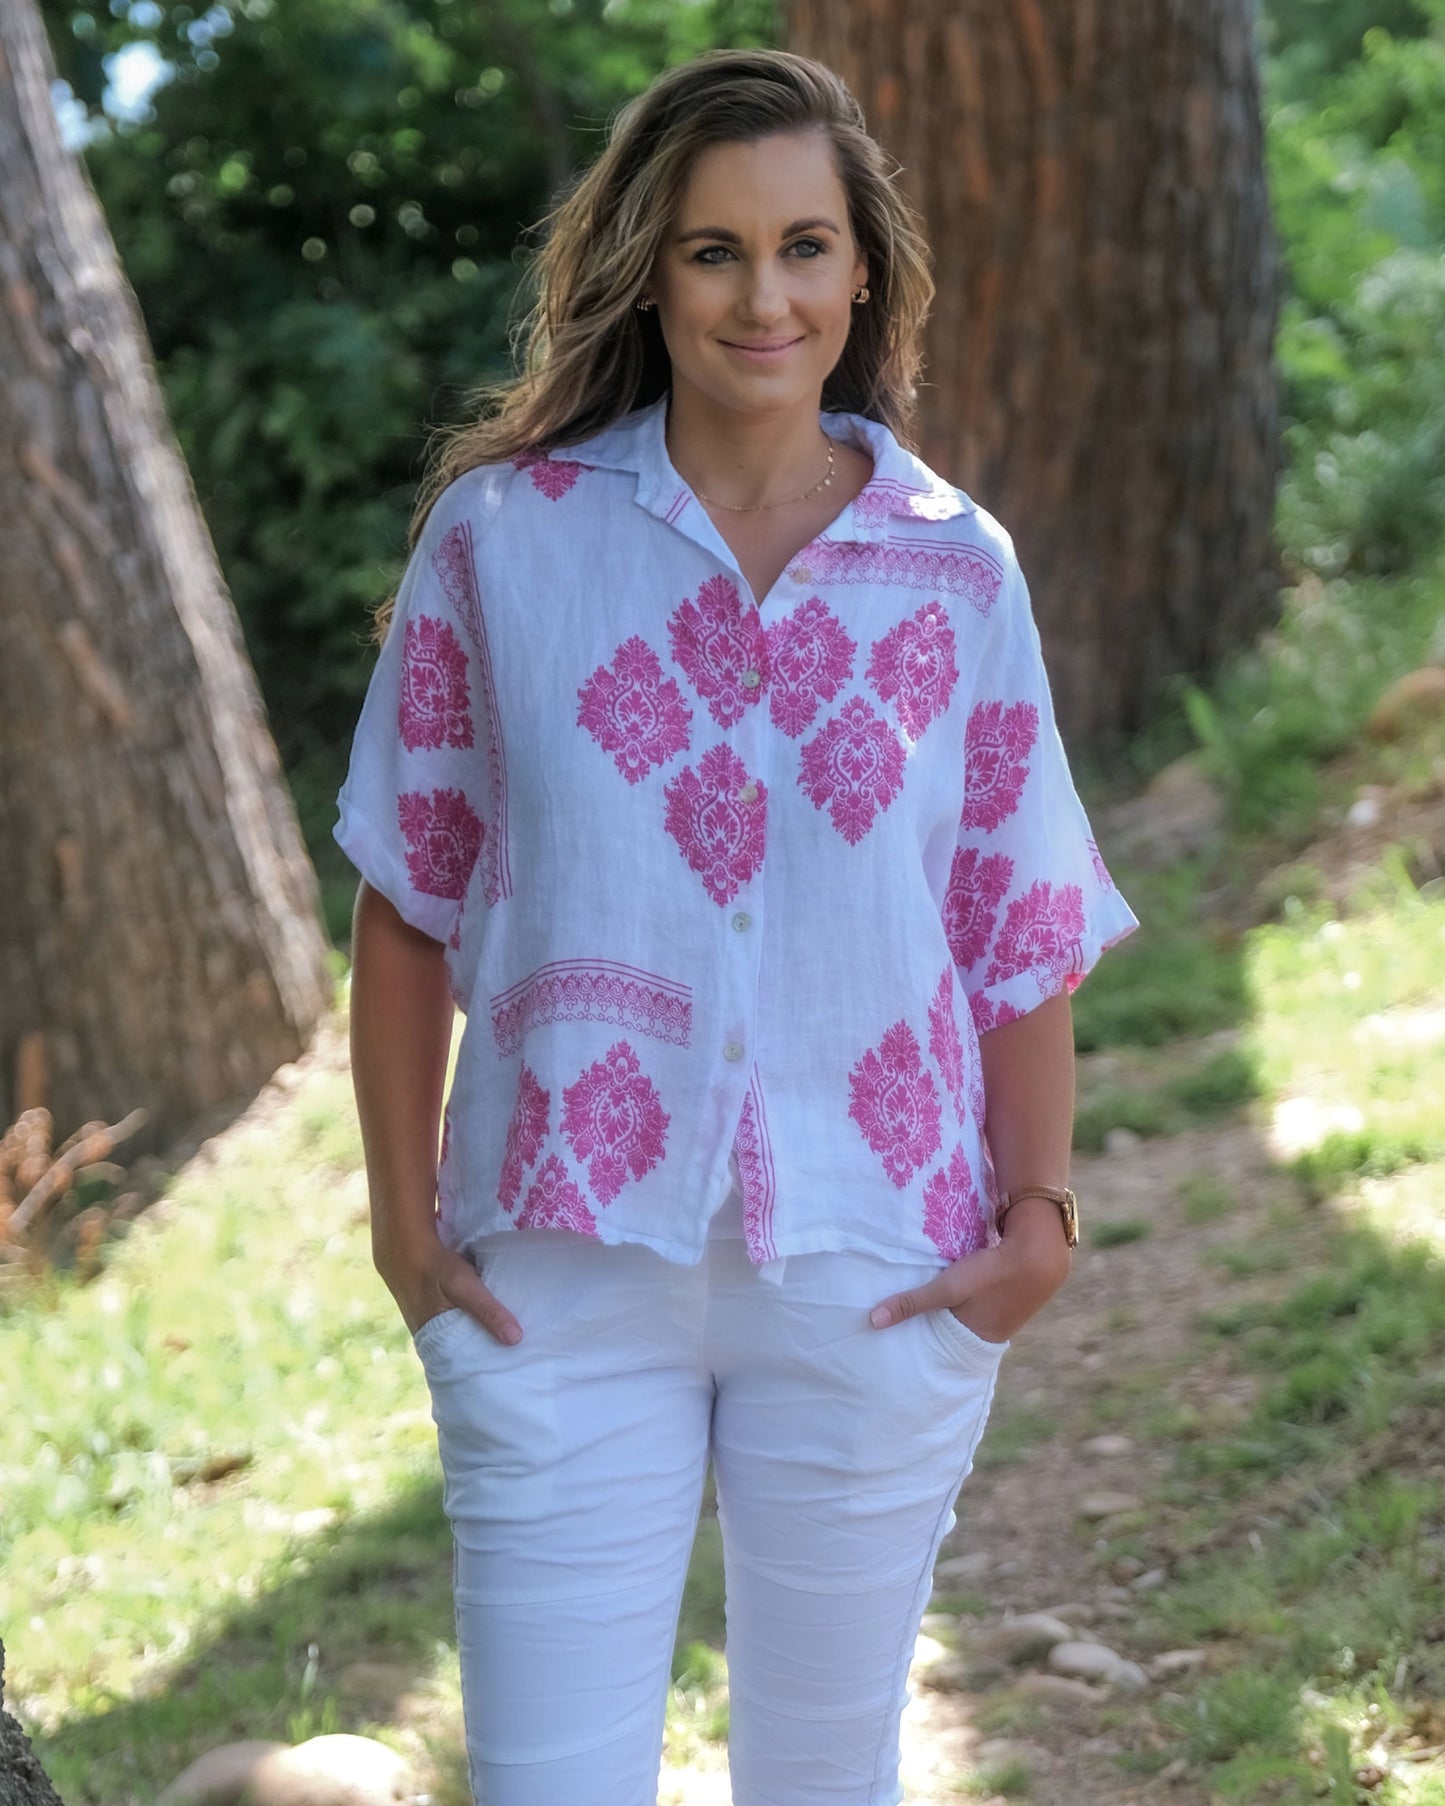 Lightweight and breathable linen, this shirt is your ideal companion for warm weather. The attention to detail shines through in the intricate damask print adorning the fabric. The collar frames your face beautifully, enhancing your natural features